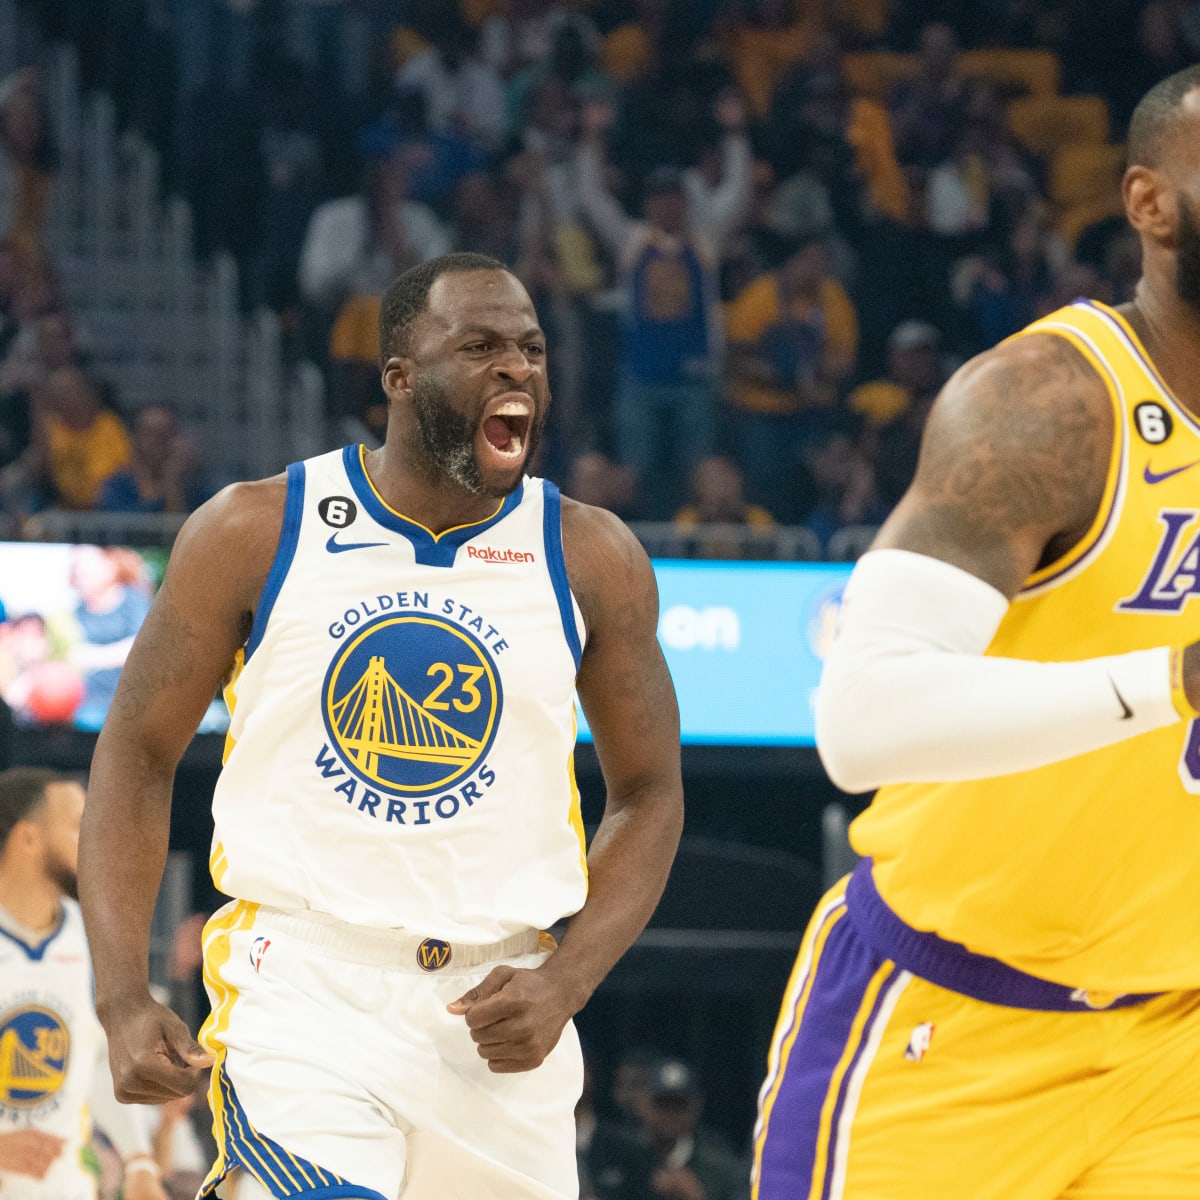 Los Angeles Lakers View Draymond Green As A Dream Target This Summer, Fadeaway World